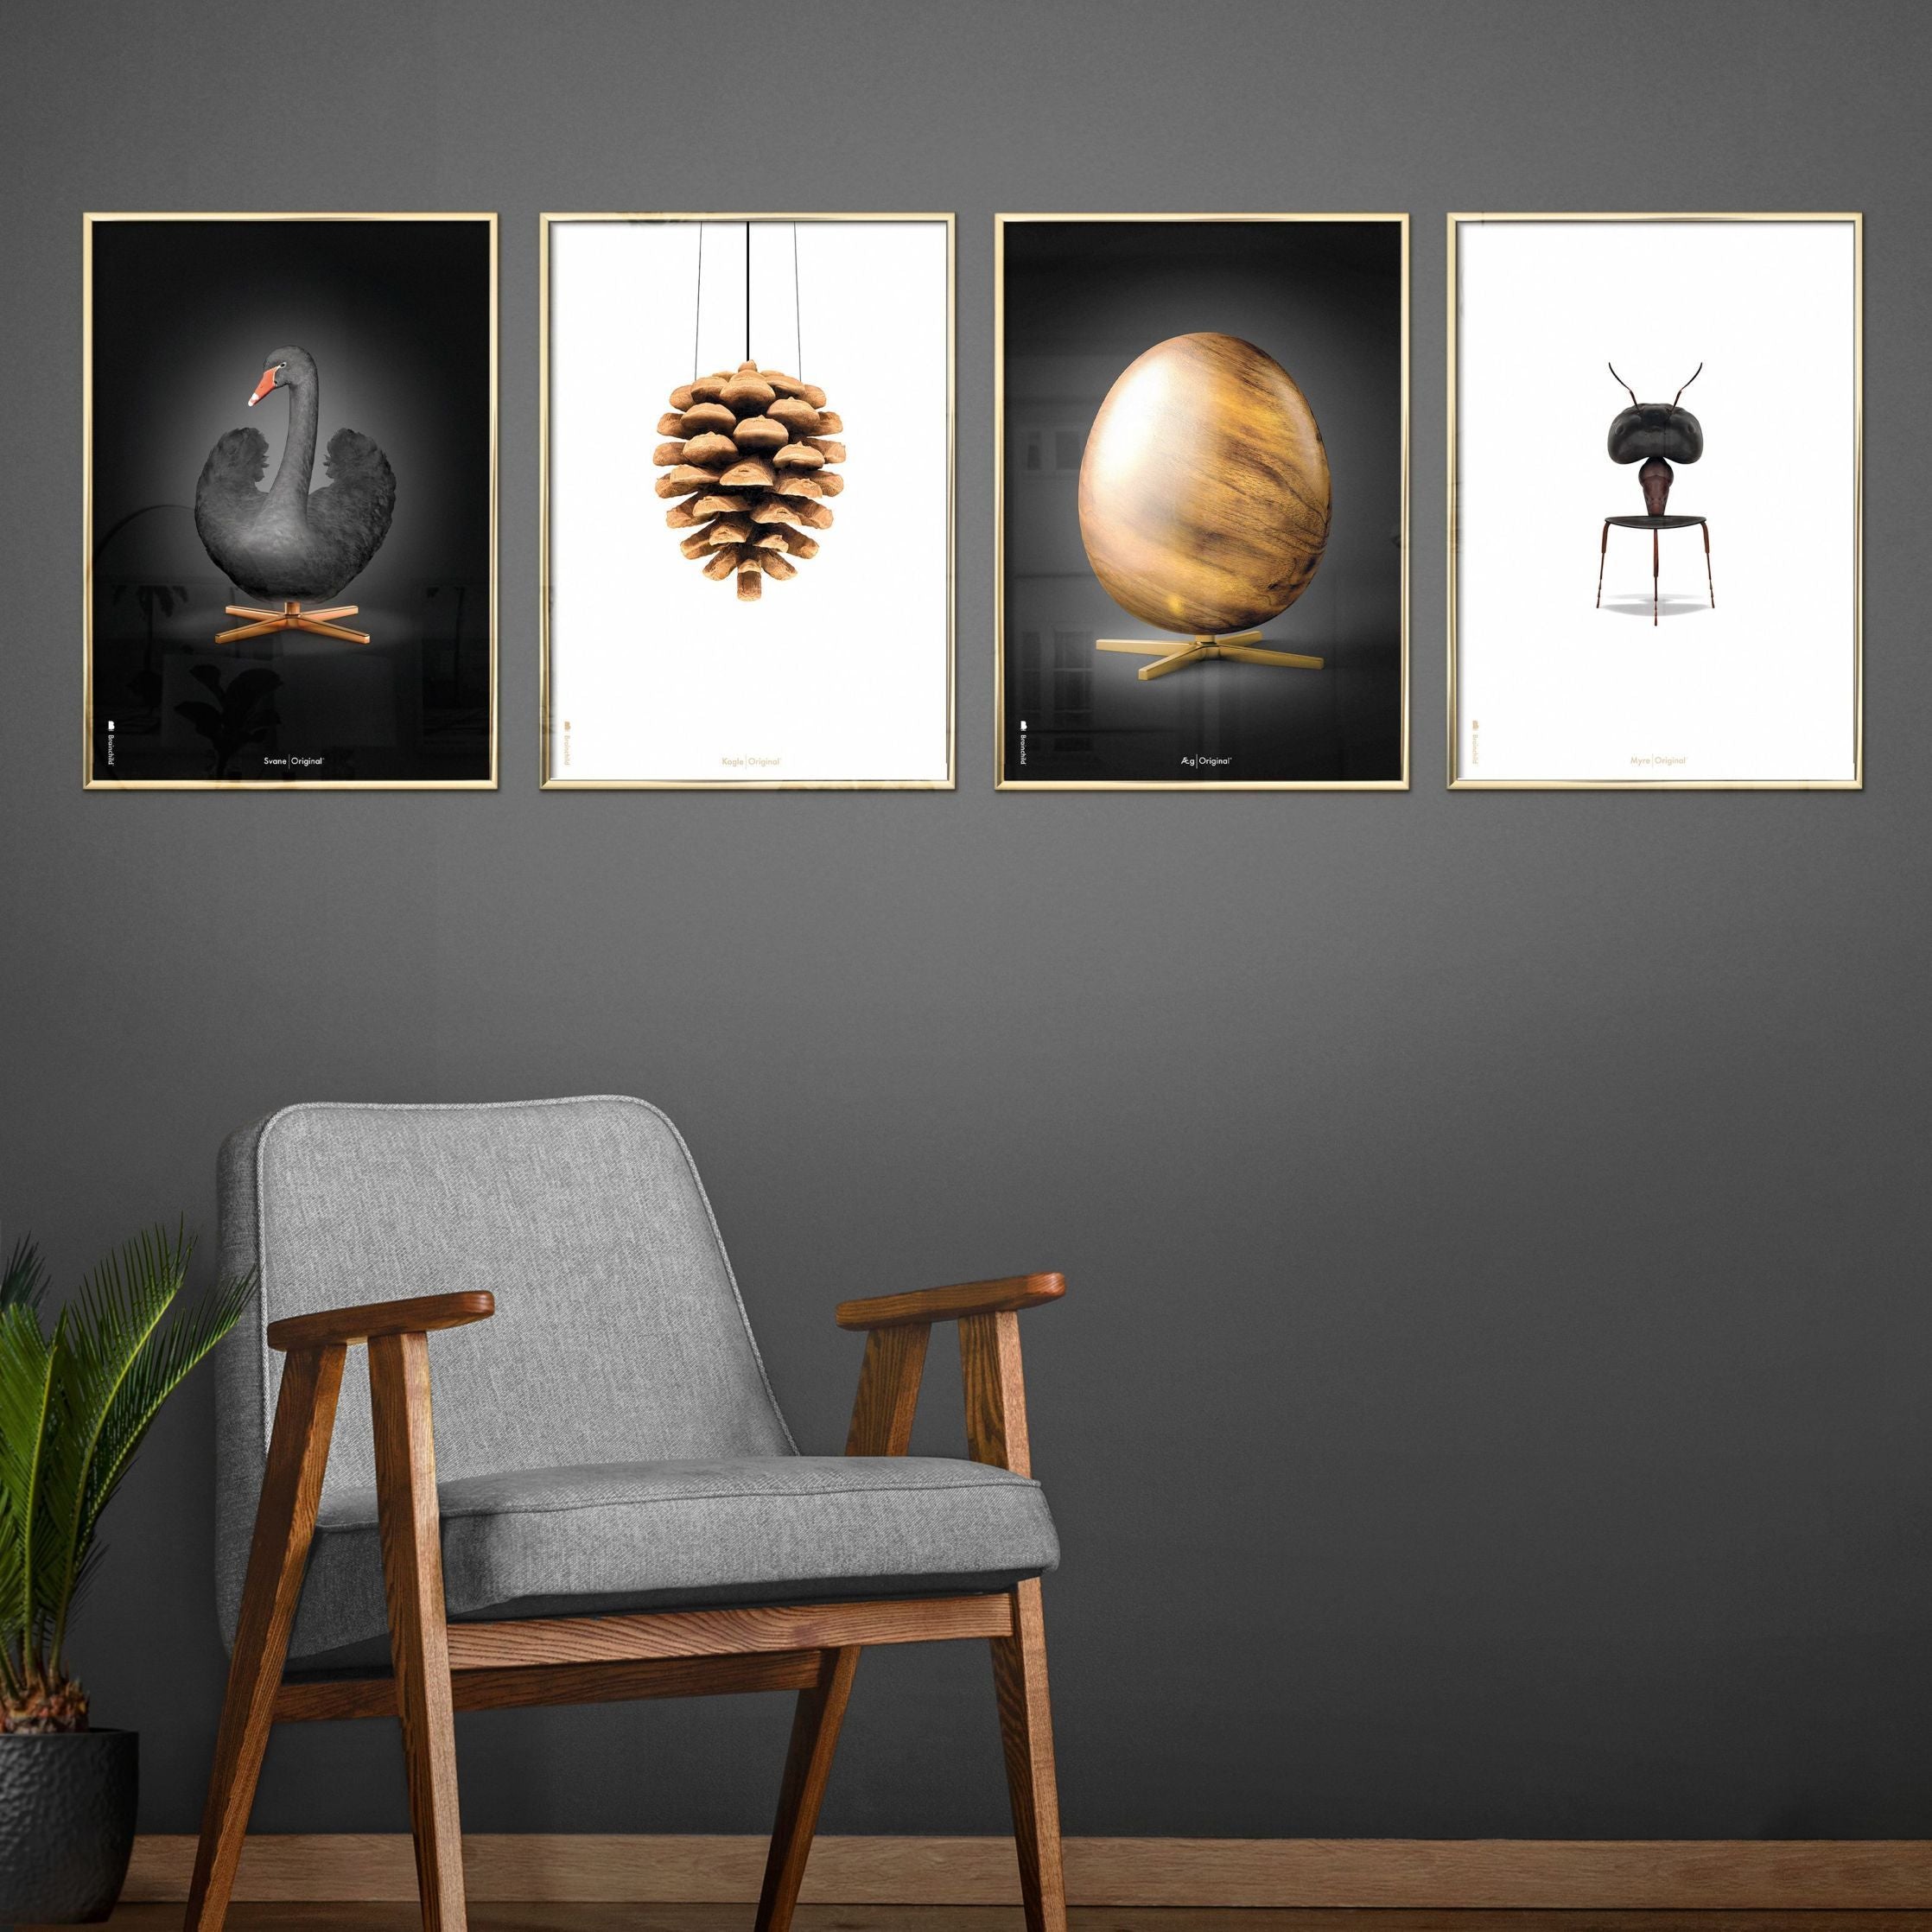 brainchild Ant Classic Poster, Frame in Black Lacquered Wood 30x40 cm, hvid baggrund